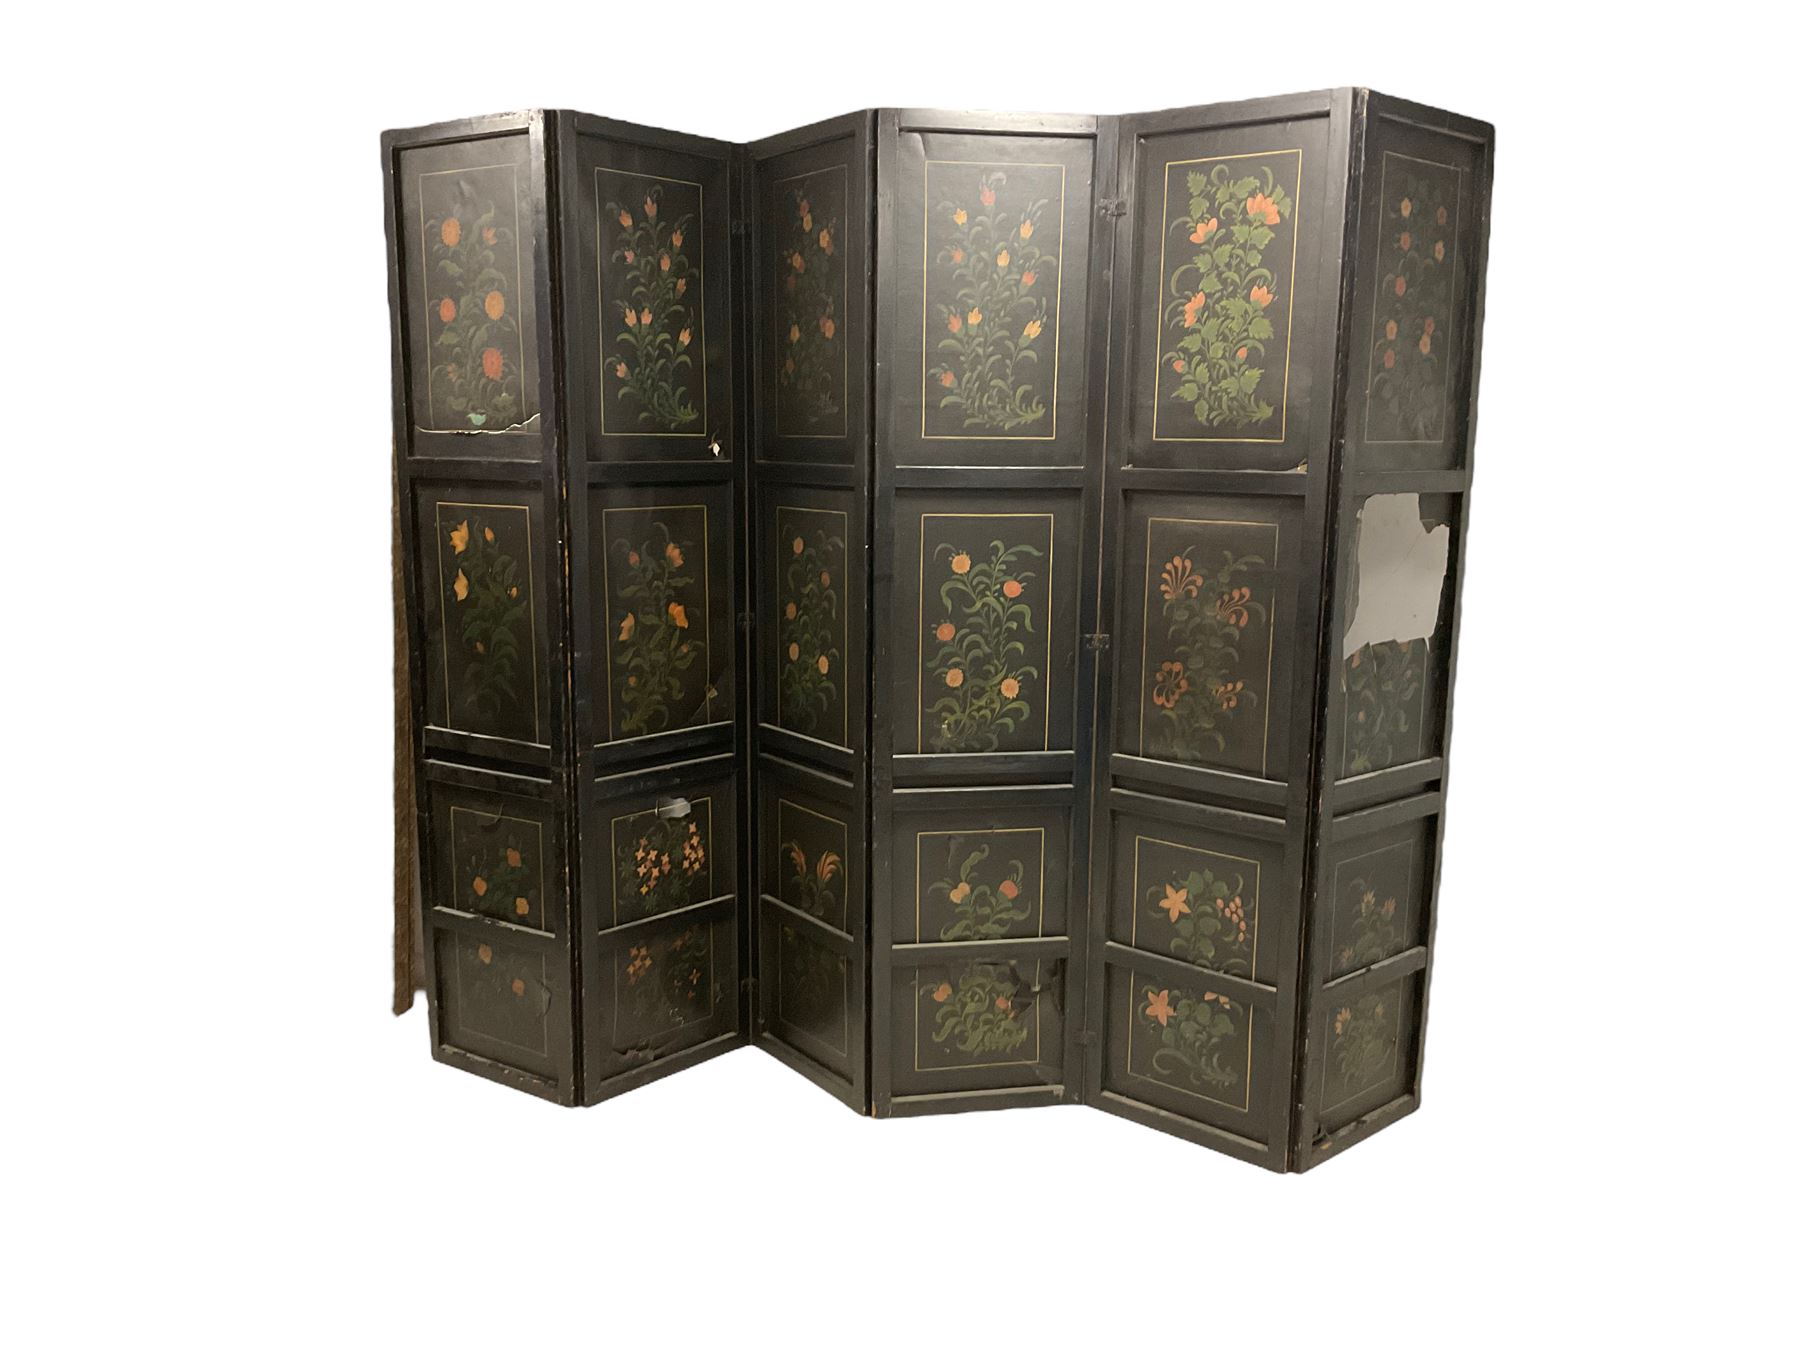 Late 18th century Dutch painted leather six panel screen - Image 16 of 16